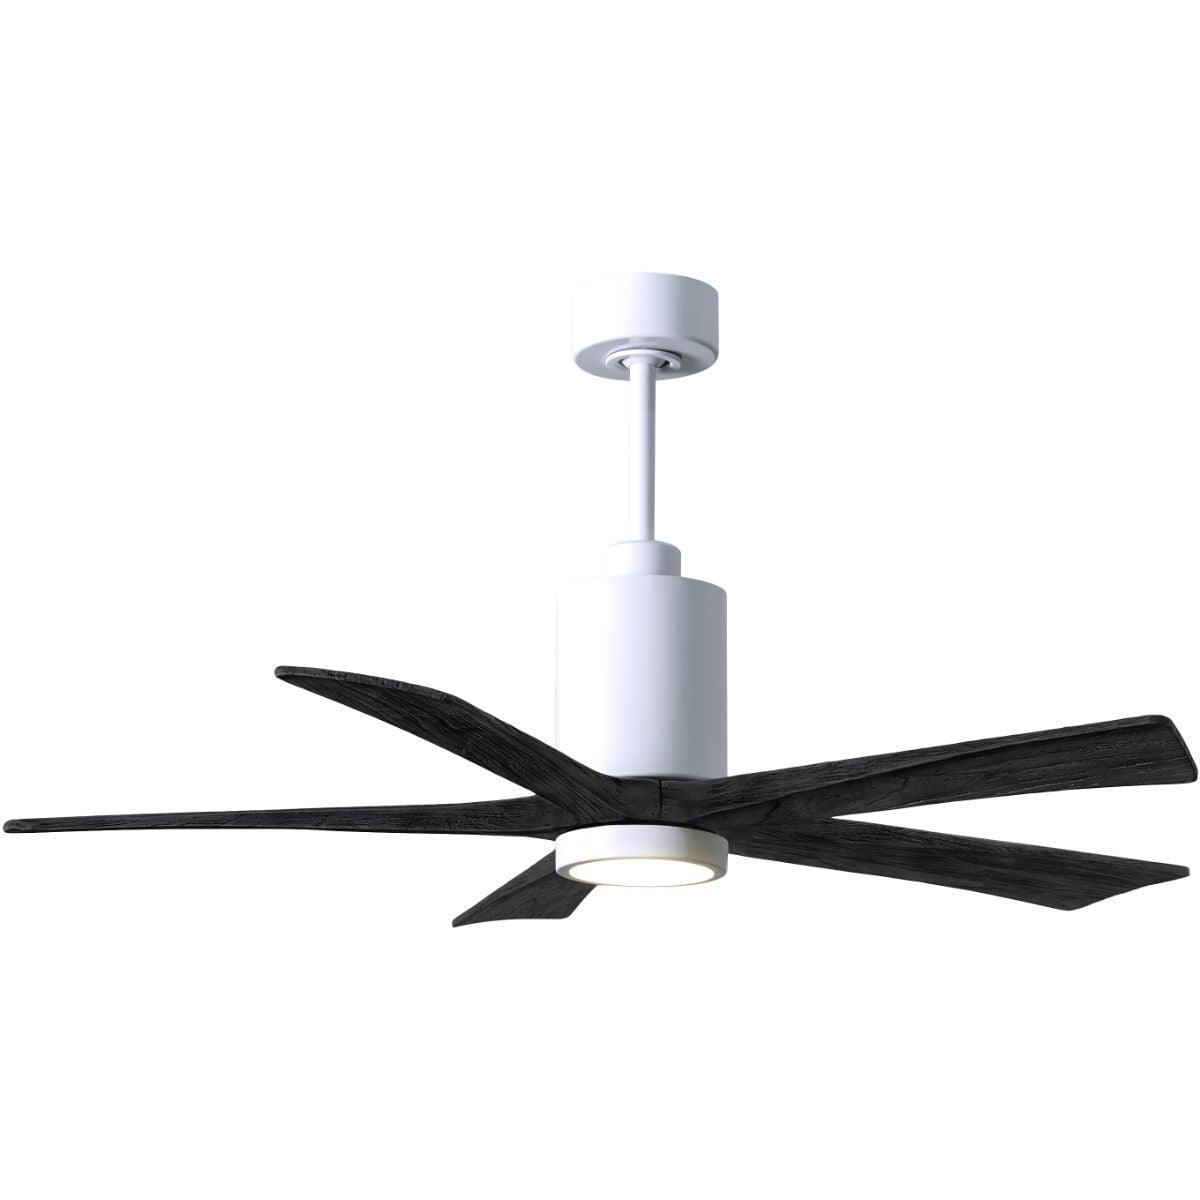 Patricia 52 Inch 5 Blades Modern Outdoor Ceiling Fan With Light, Wall And Remote Control Included